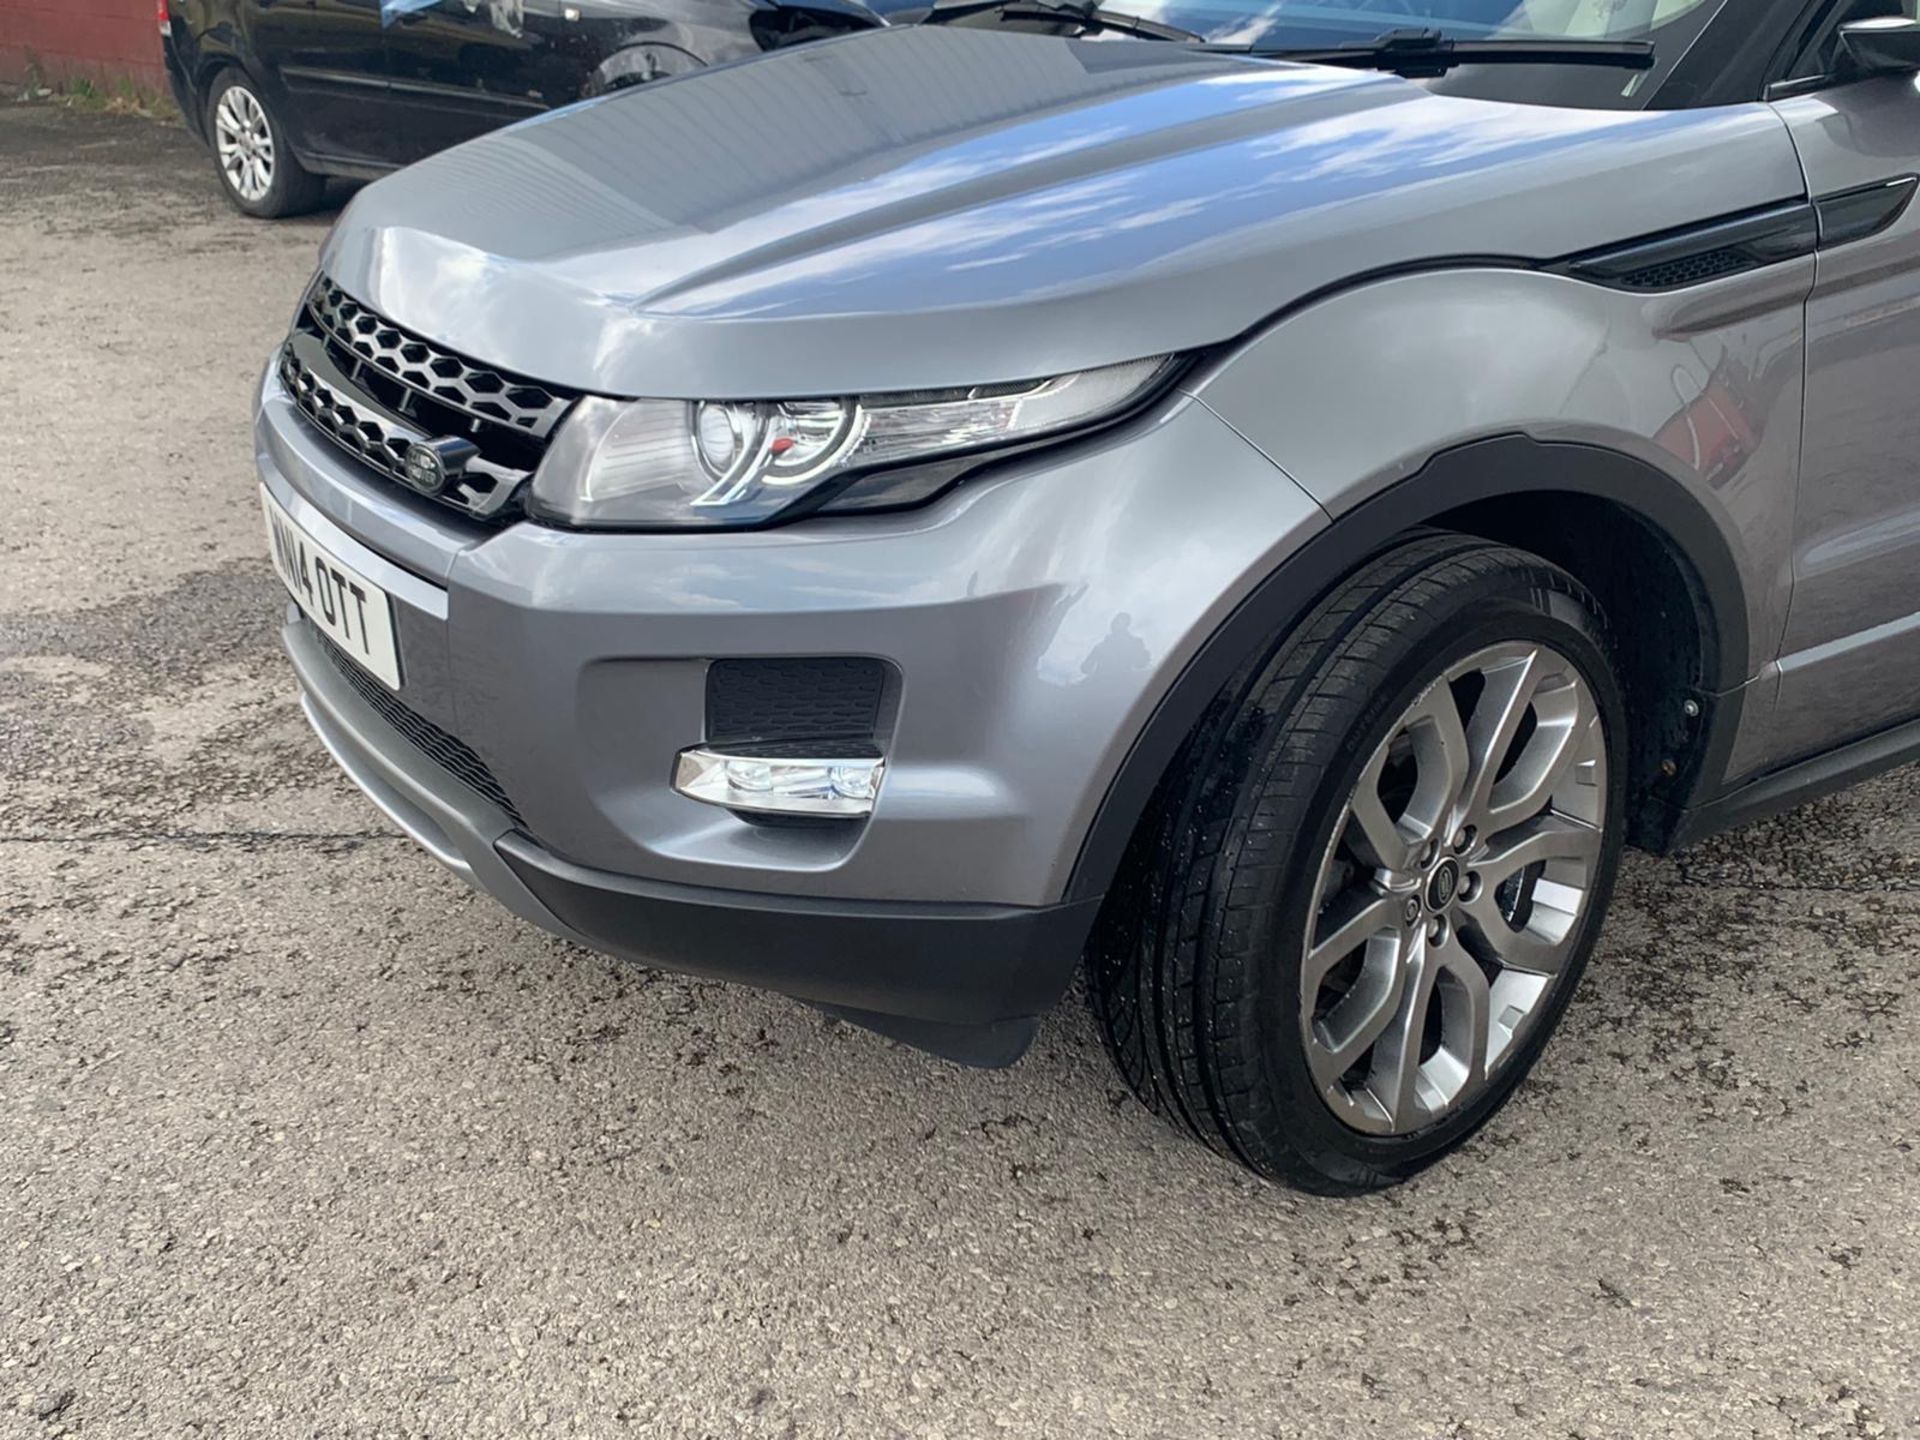 2014/14 REG LAND ROVER RANGE ROVER EVOQUE DYNAMIC S 2.2 DIESEL GREY, SHOWING 2 FORMER KEEPERS - Image 4 of 13